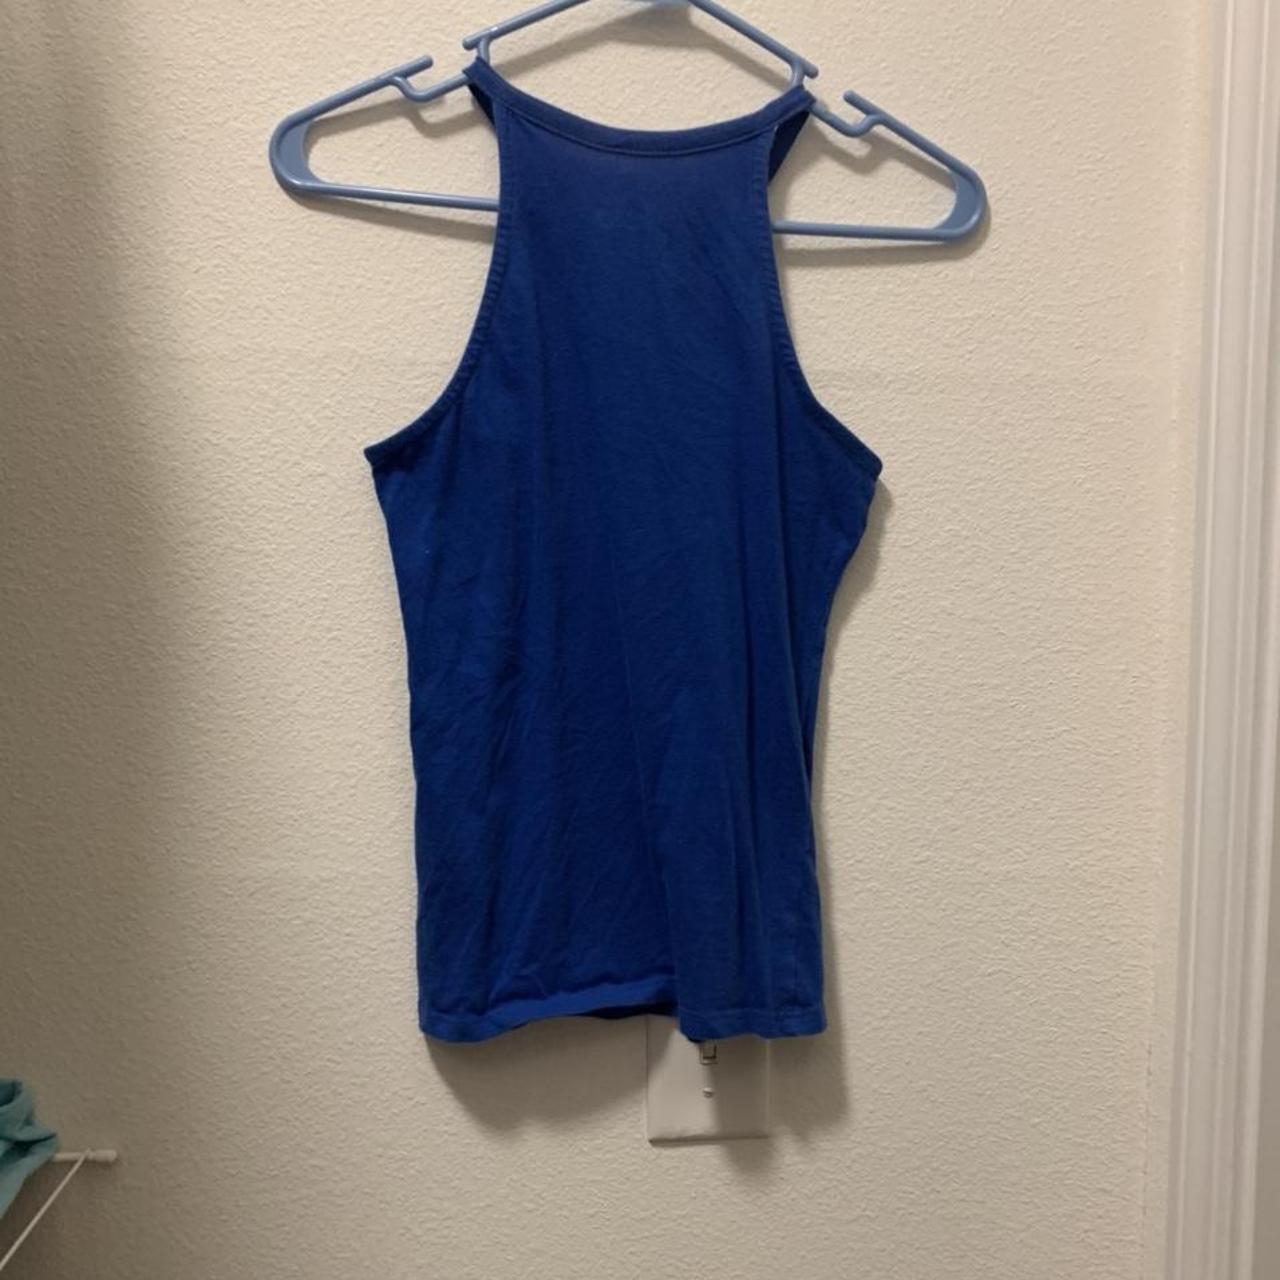 Product Image 3 - Blue High Neck Tank Top

Size